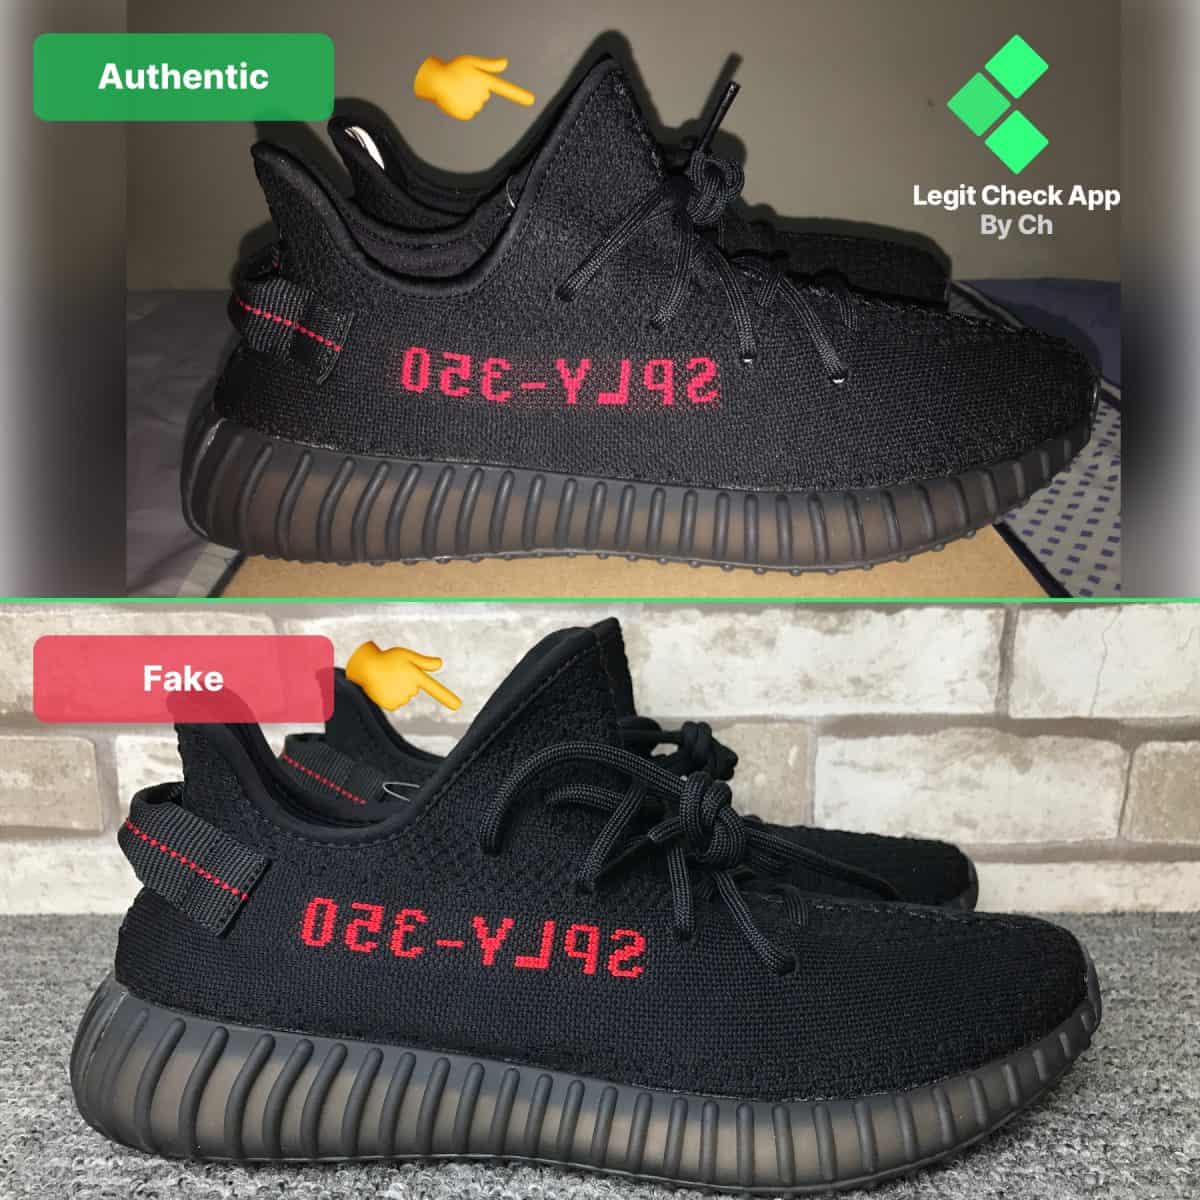 Adidas Yeezy Boost 350 V2 “Black Non-Reflective” Request